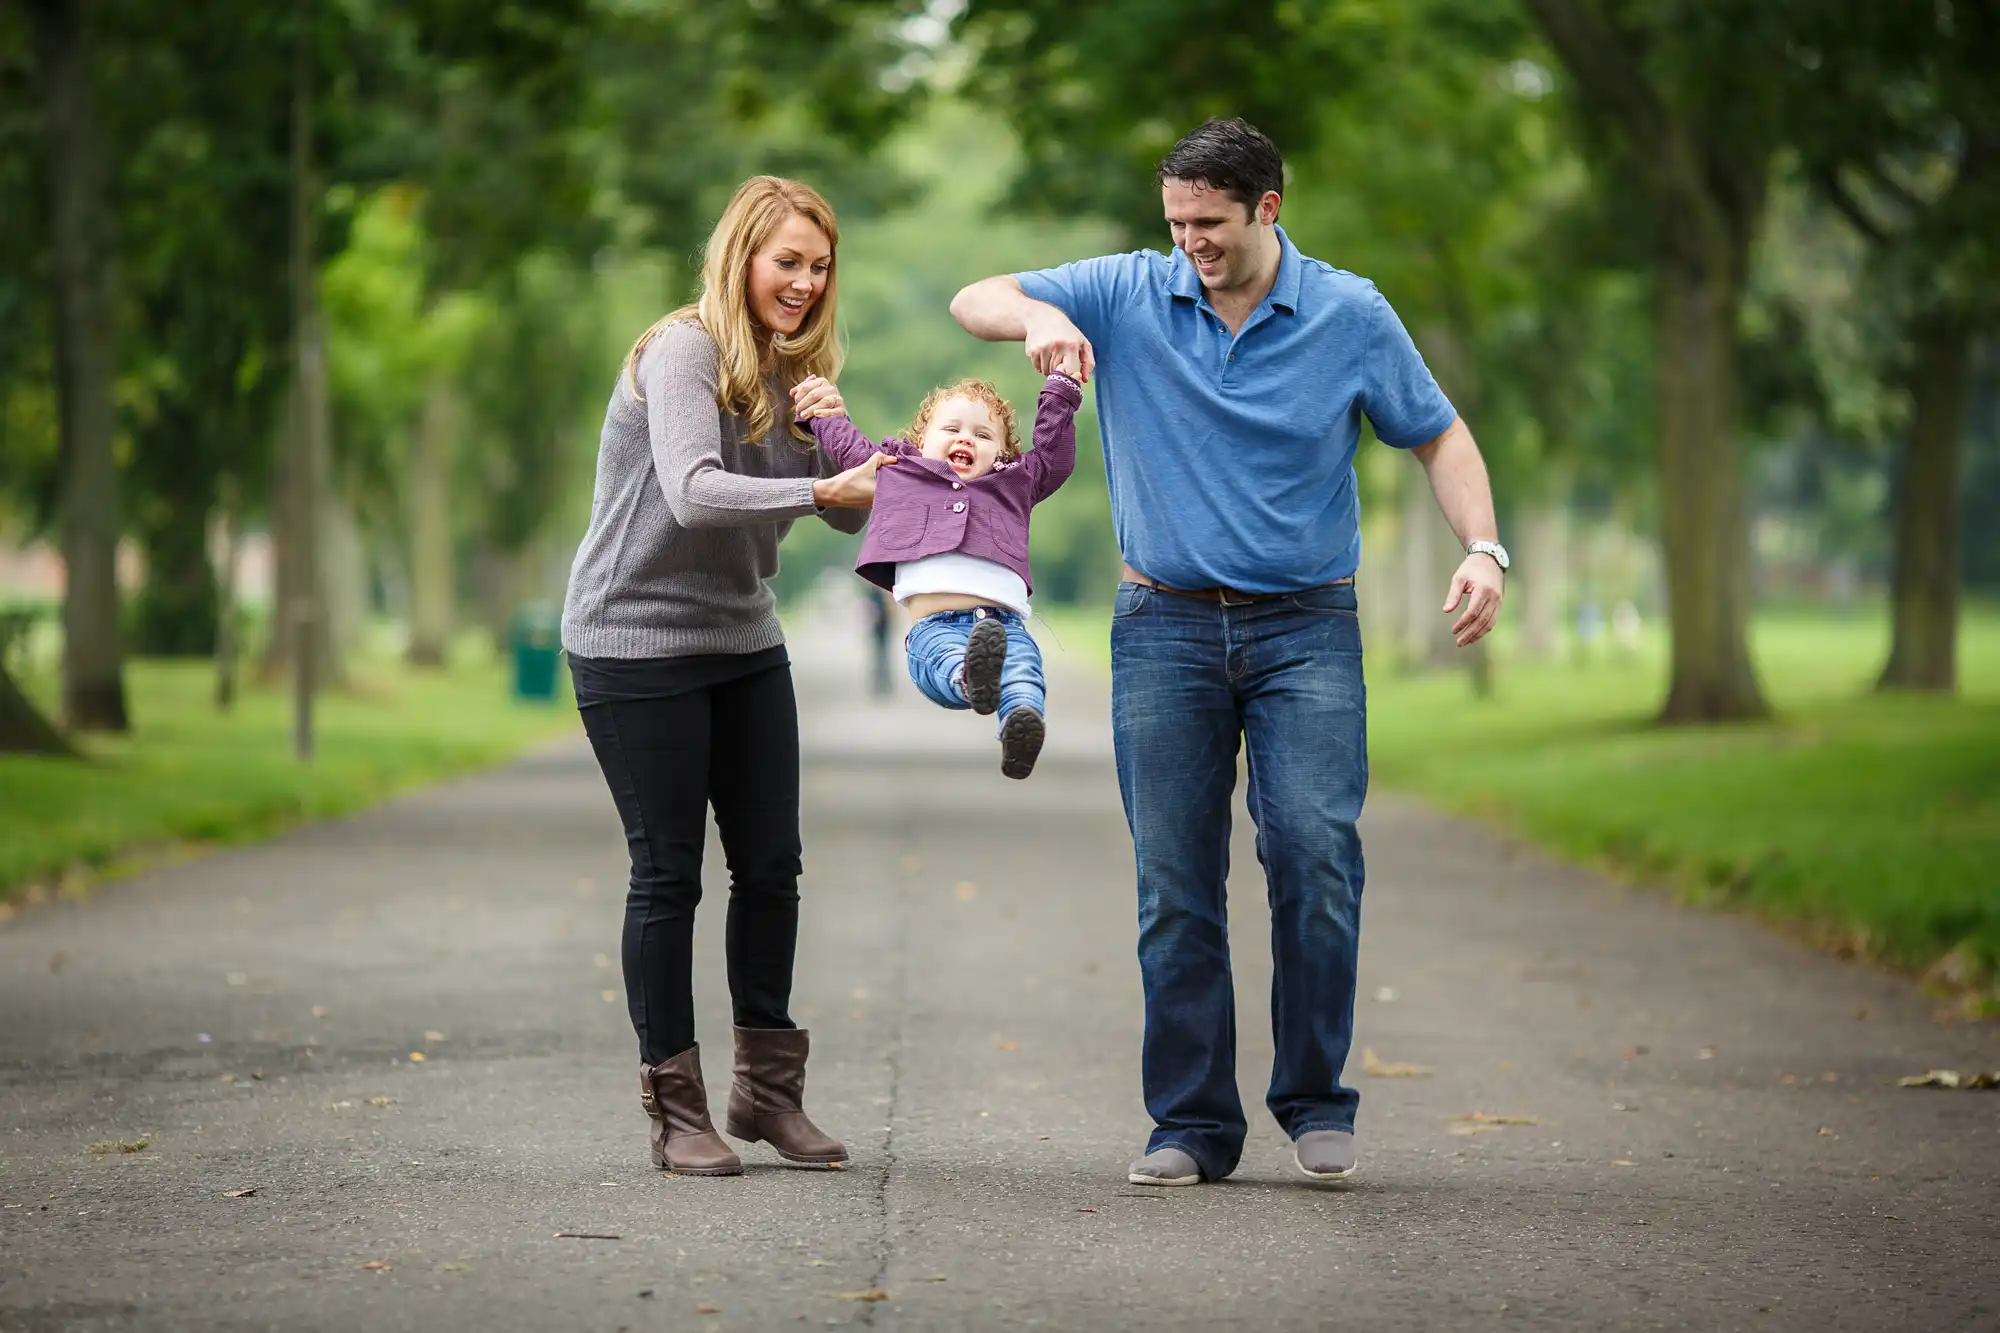 A joyful family swings their young child by the arms while walking on a park pathway, surrounded by trees.